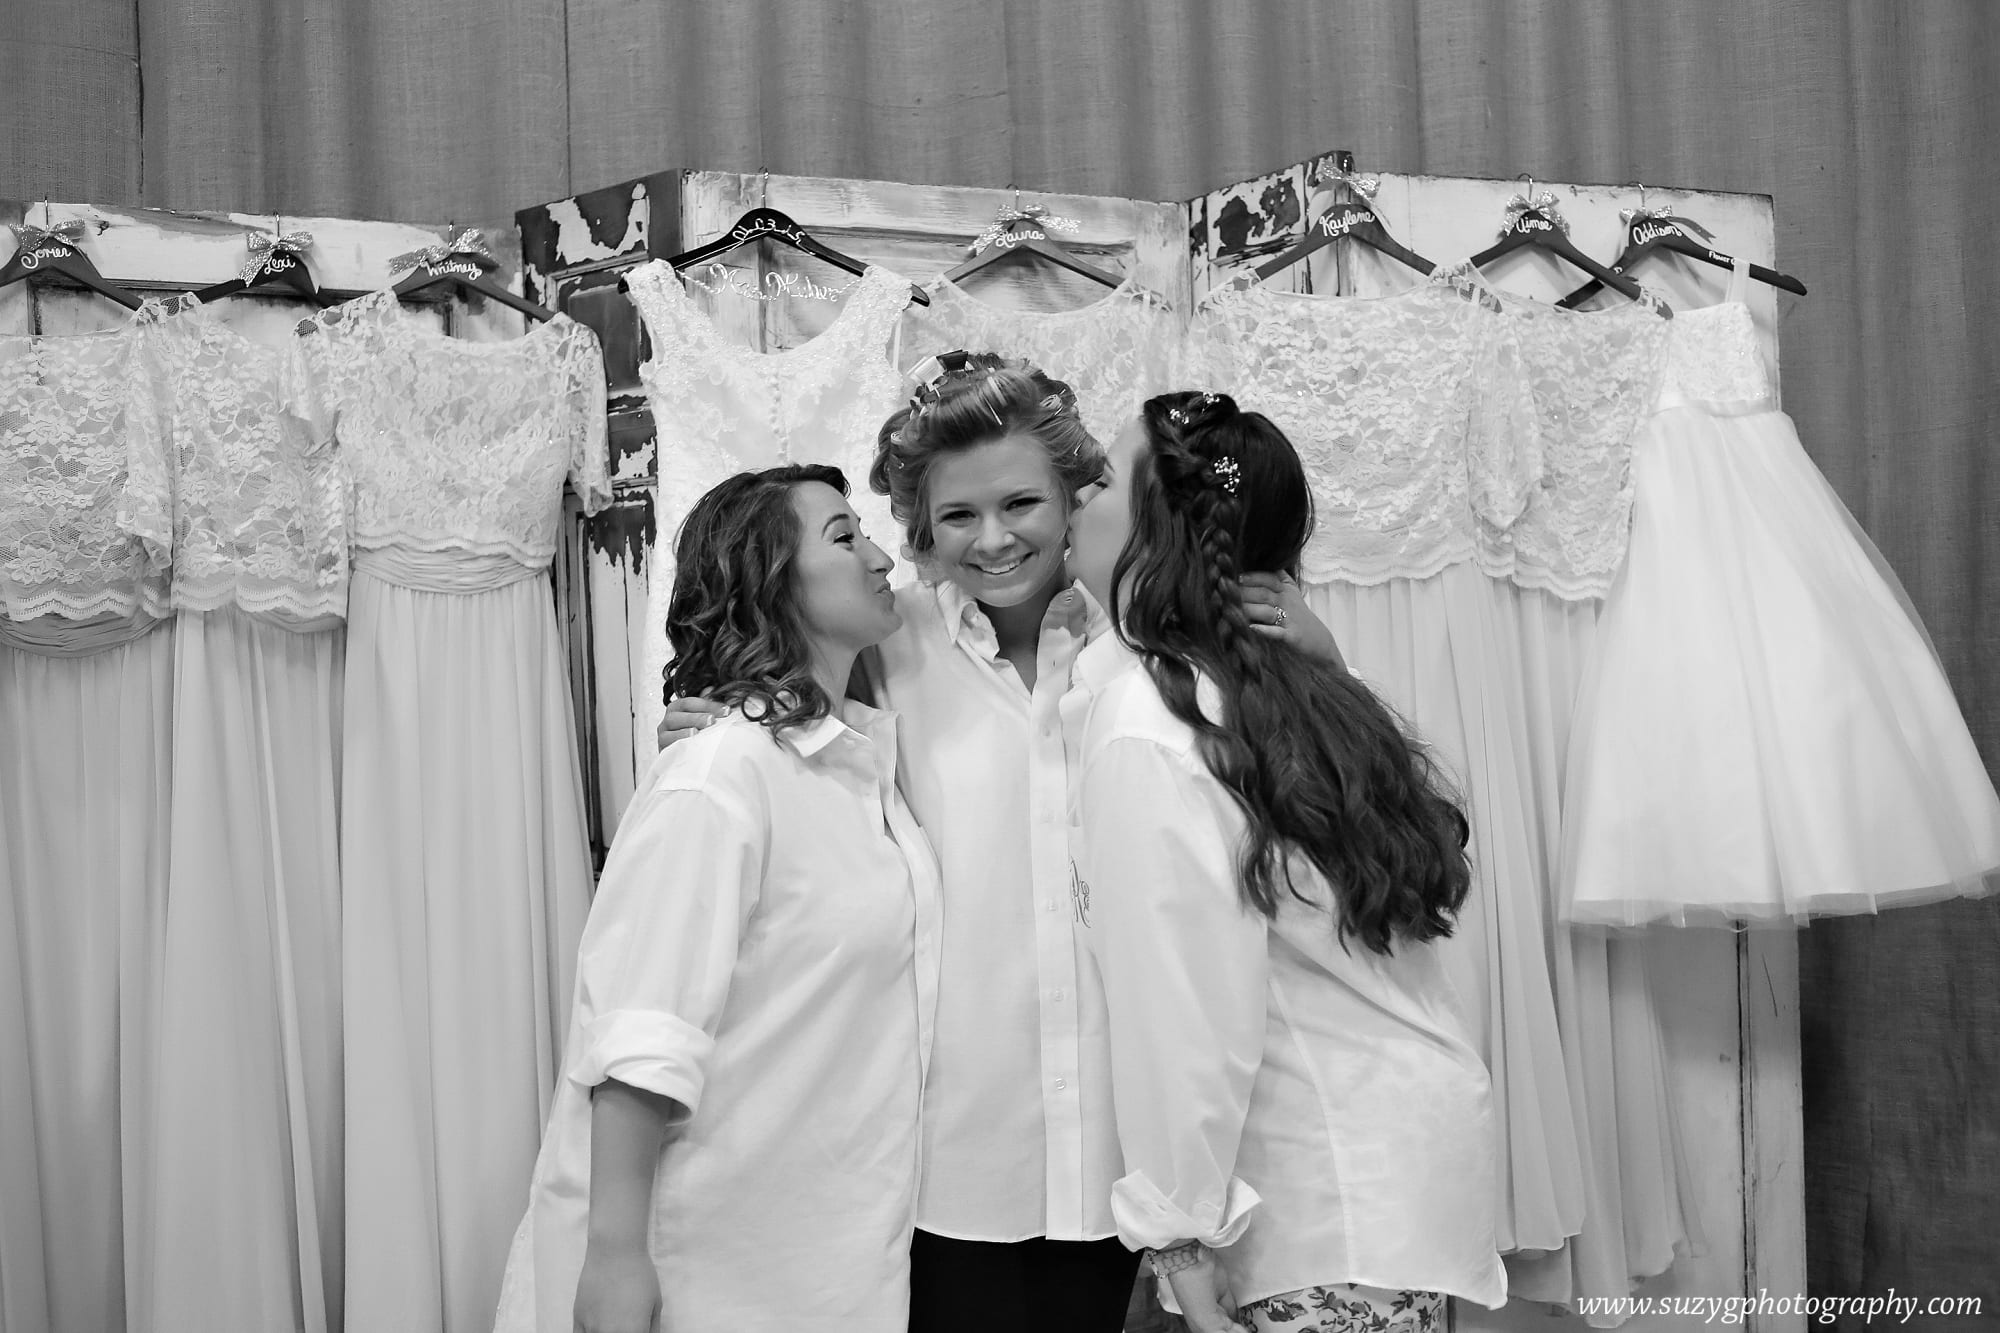 vows by victoria-lake charles-wedding-photography-suzy g-photography-suzygphotography_0023